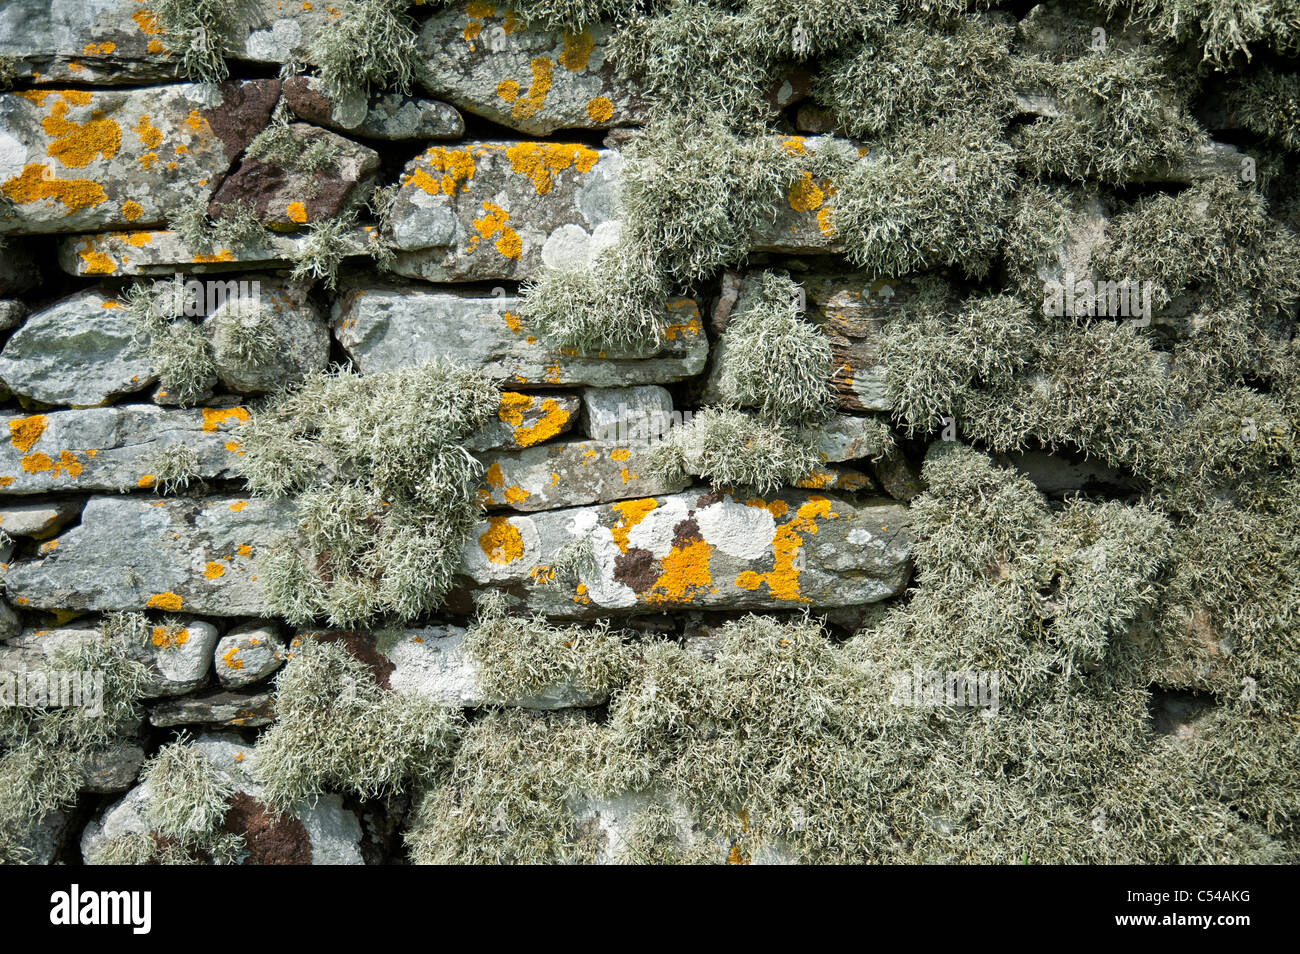 The ancient lichen covered stone walls of St Olaf's Kirk, Unst Shetland. SCO 7507 Stock Photo